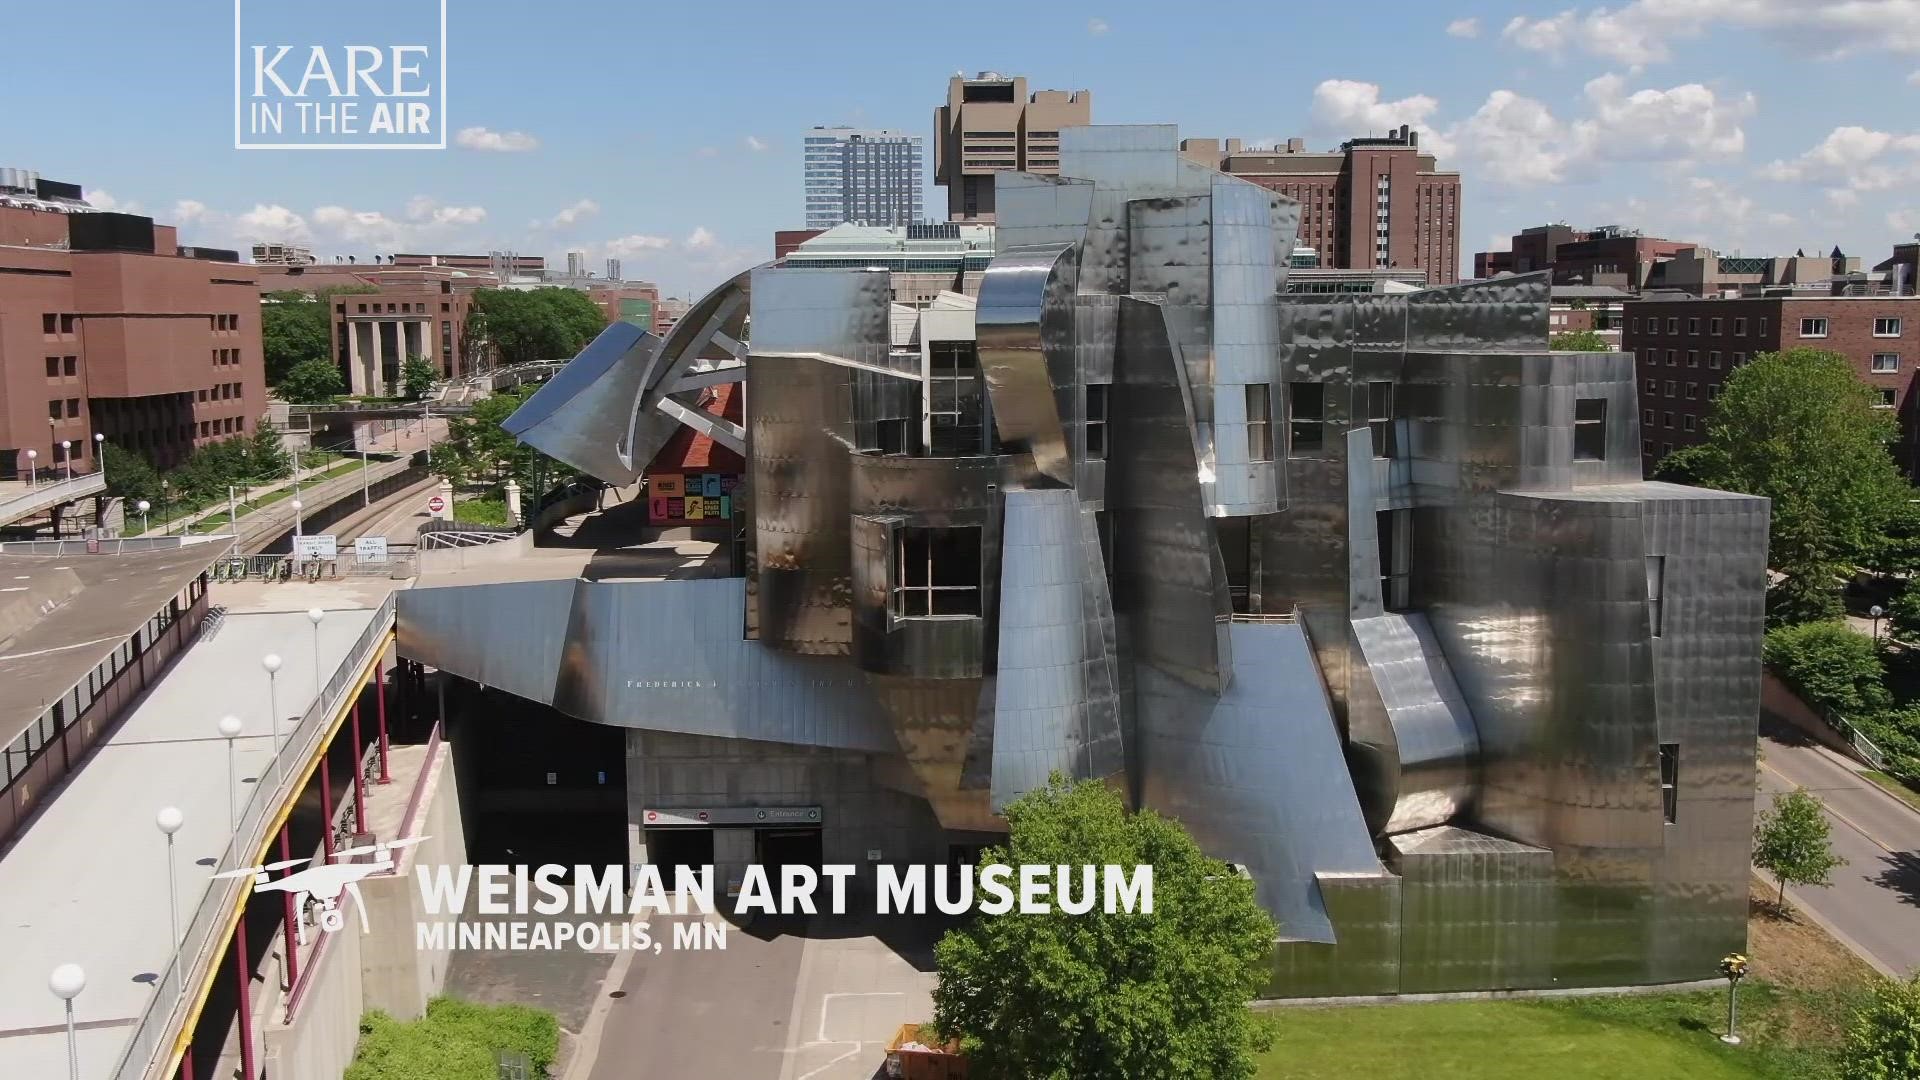 The latest installment of our summer drone series KARE in the Air takes us over the Weisman Art Museum, an unusual structure that in itself is a work of art.